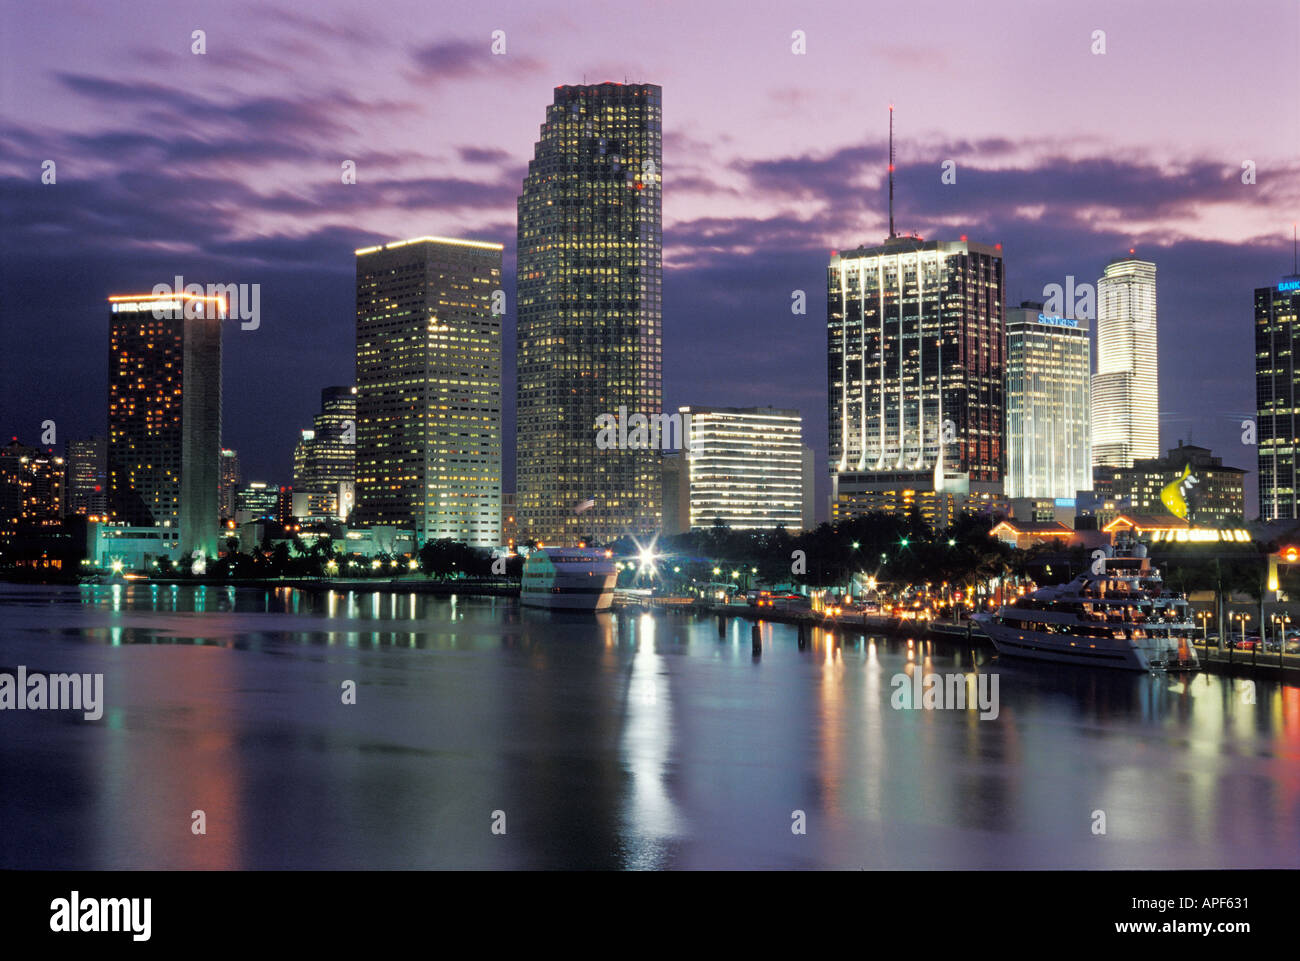 Downtown Miami Florida reflects on Biscayne Bay at dusk Stock Photo